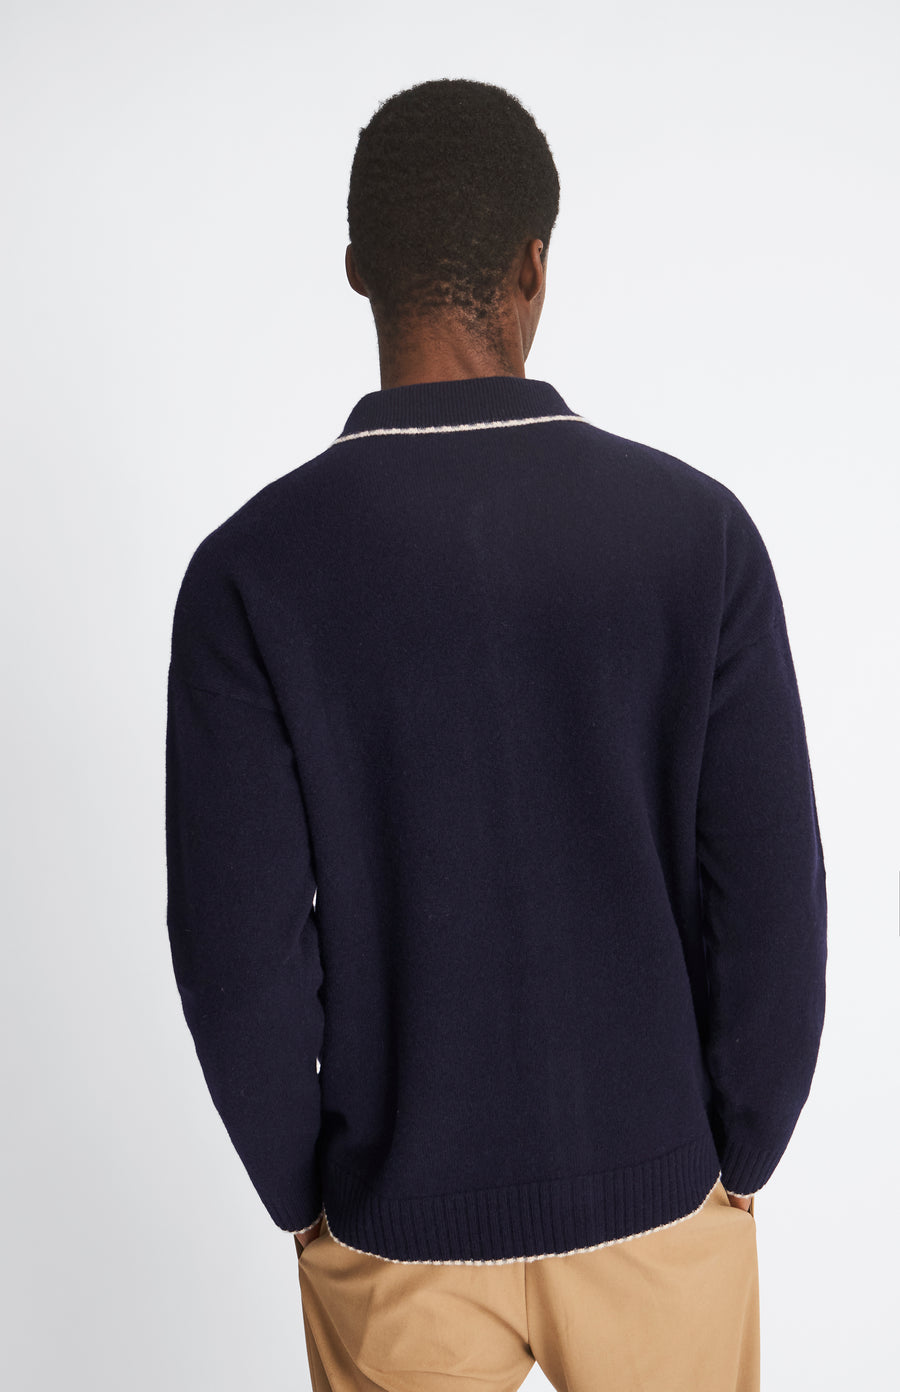 Pringle Knitted lambswool overshirt in Navy with contrast edging rear view